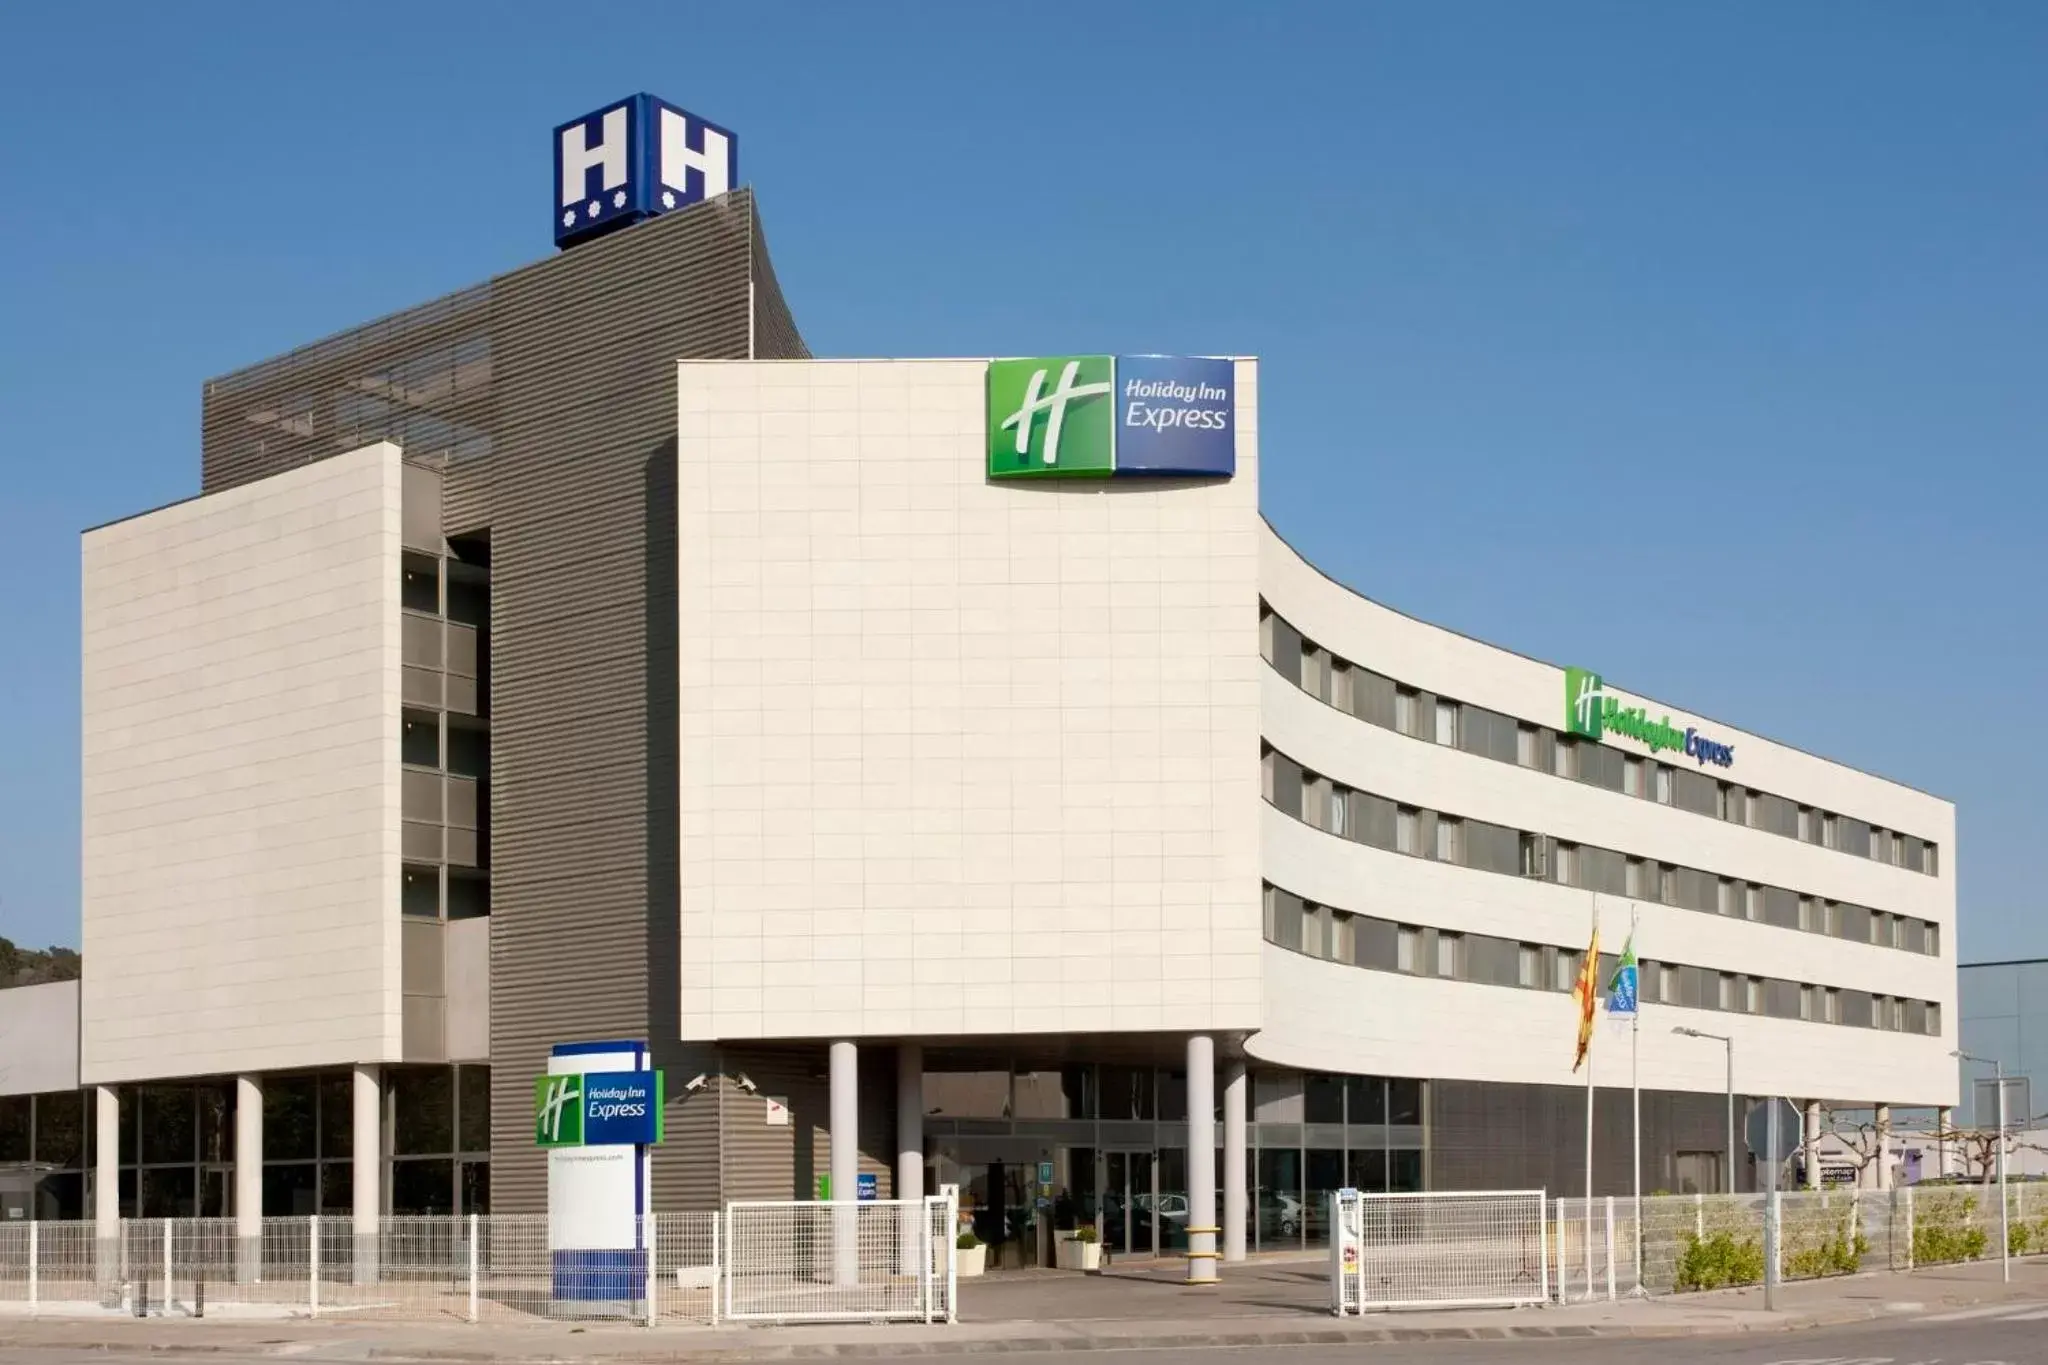 Property Building in Holiday Inn Express Molins de Rei